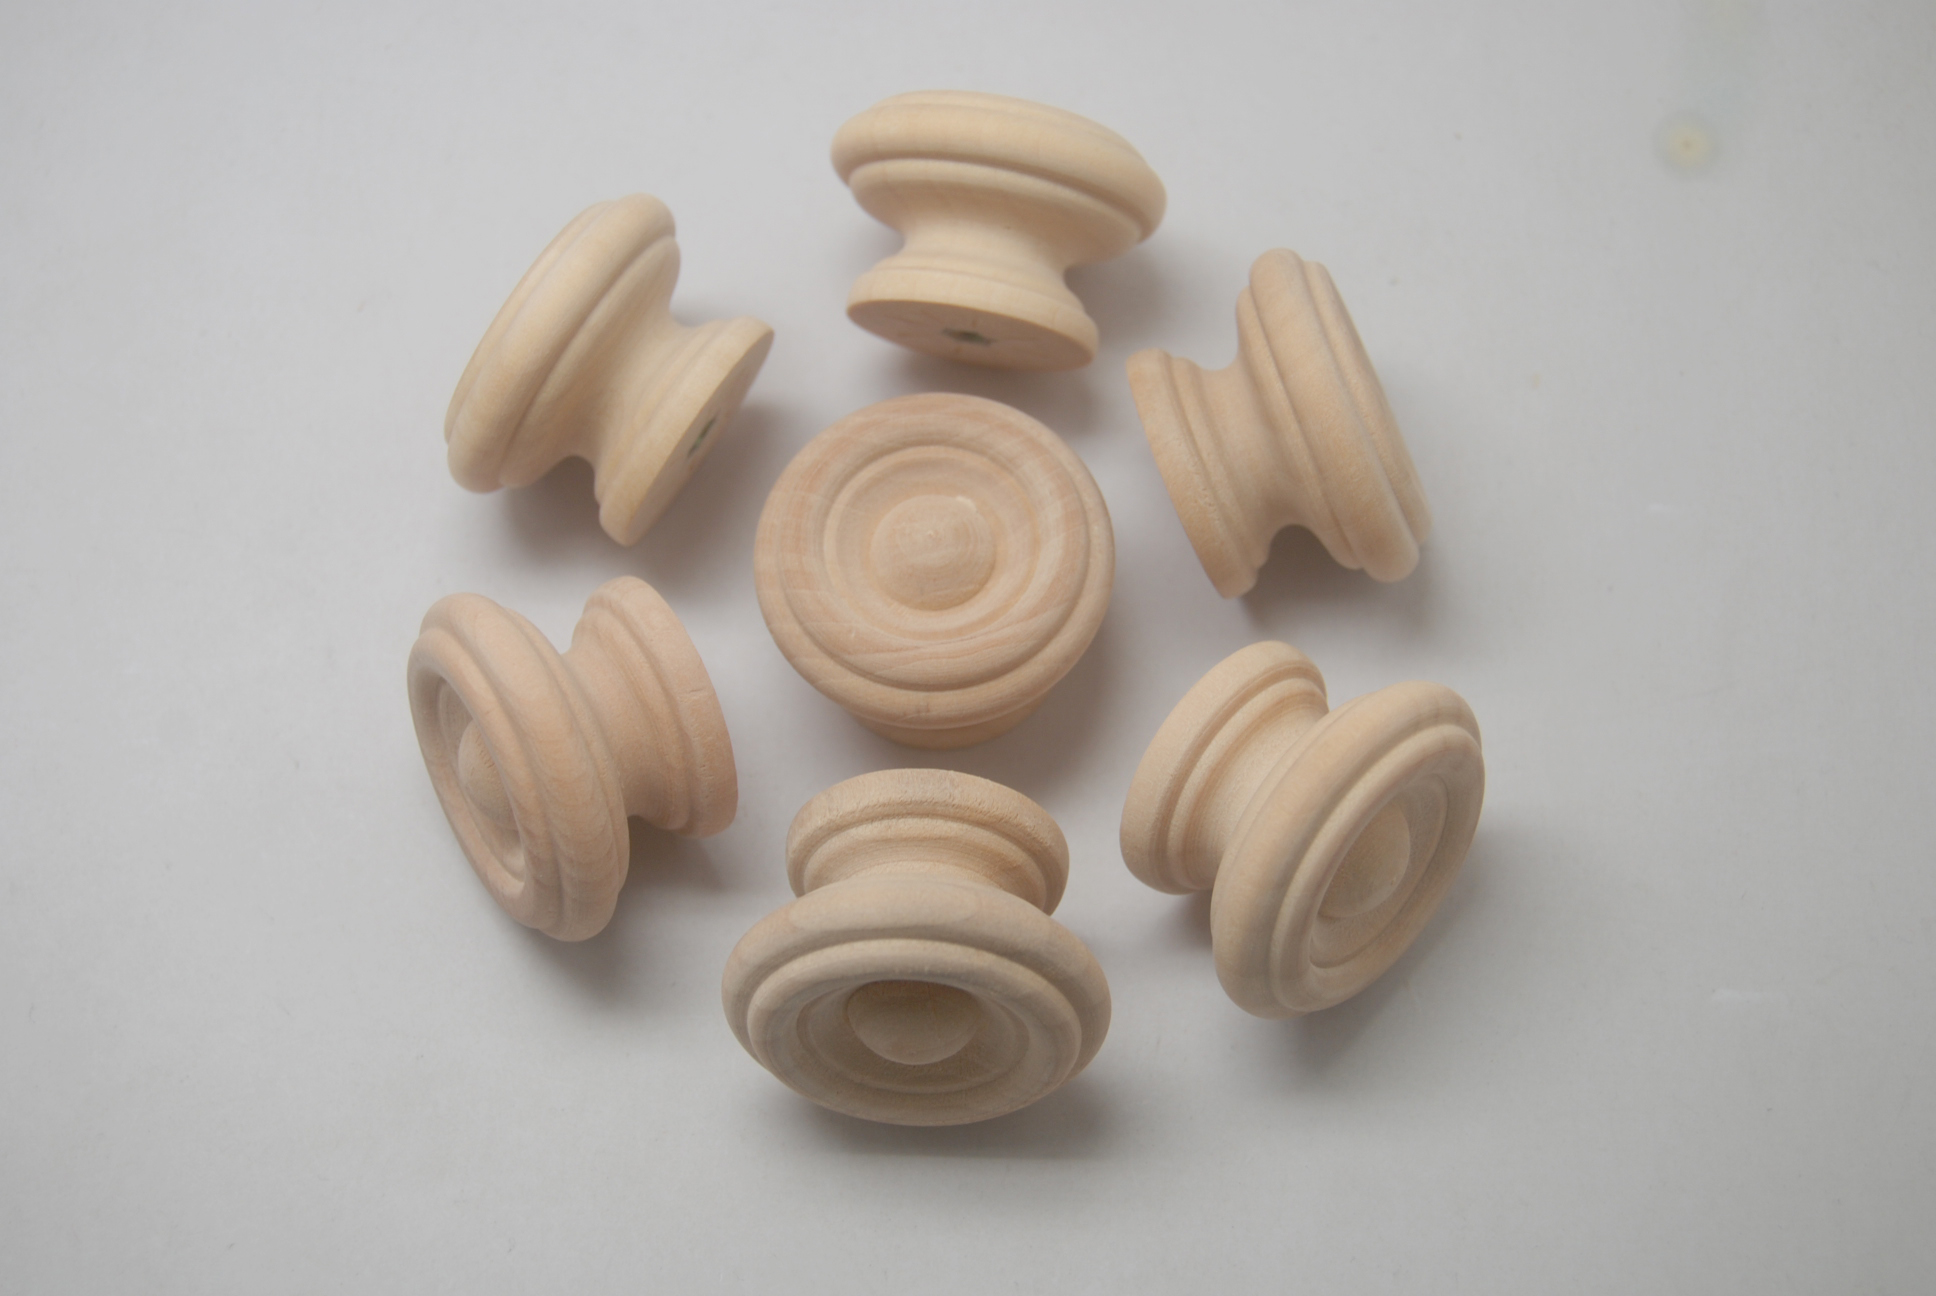 small-round-wooden-knobs-wooden-cupboard-knobs-china-cabinet-knobs